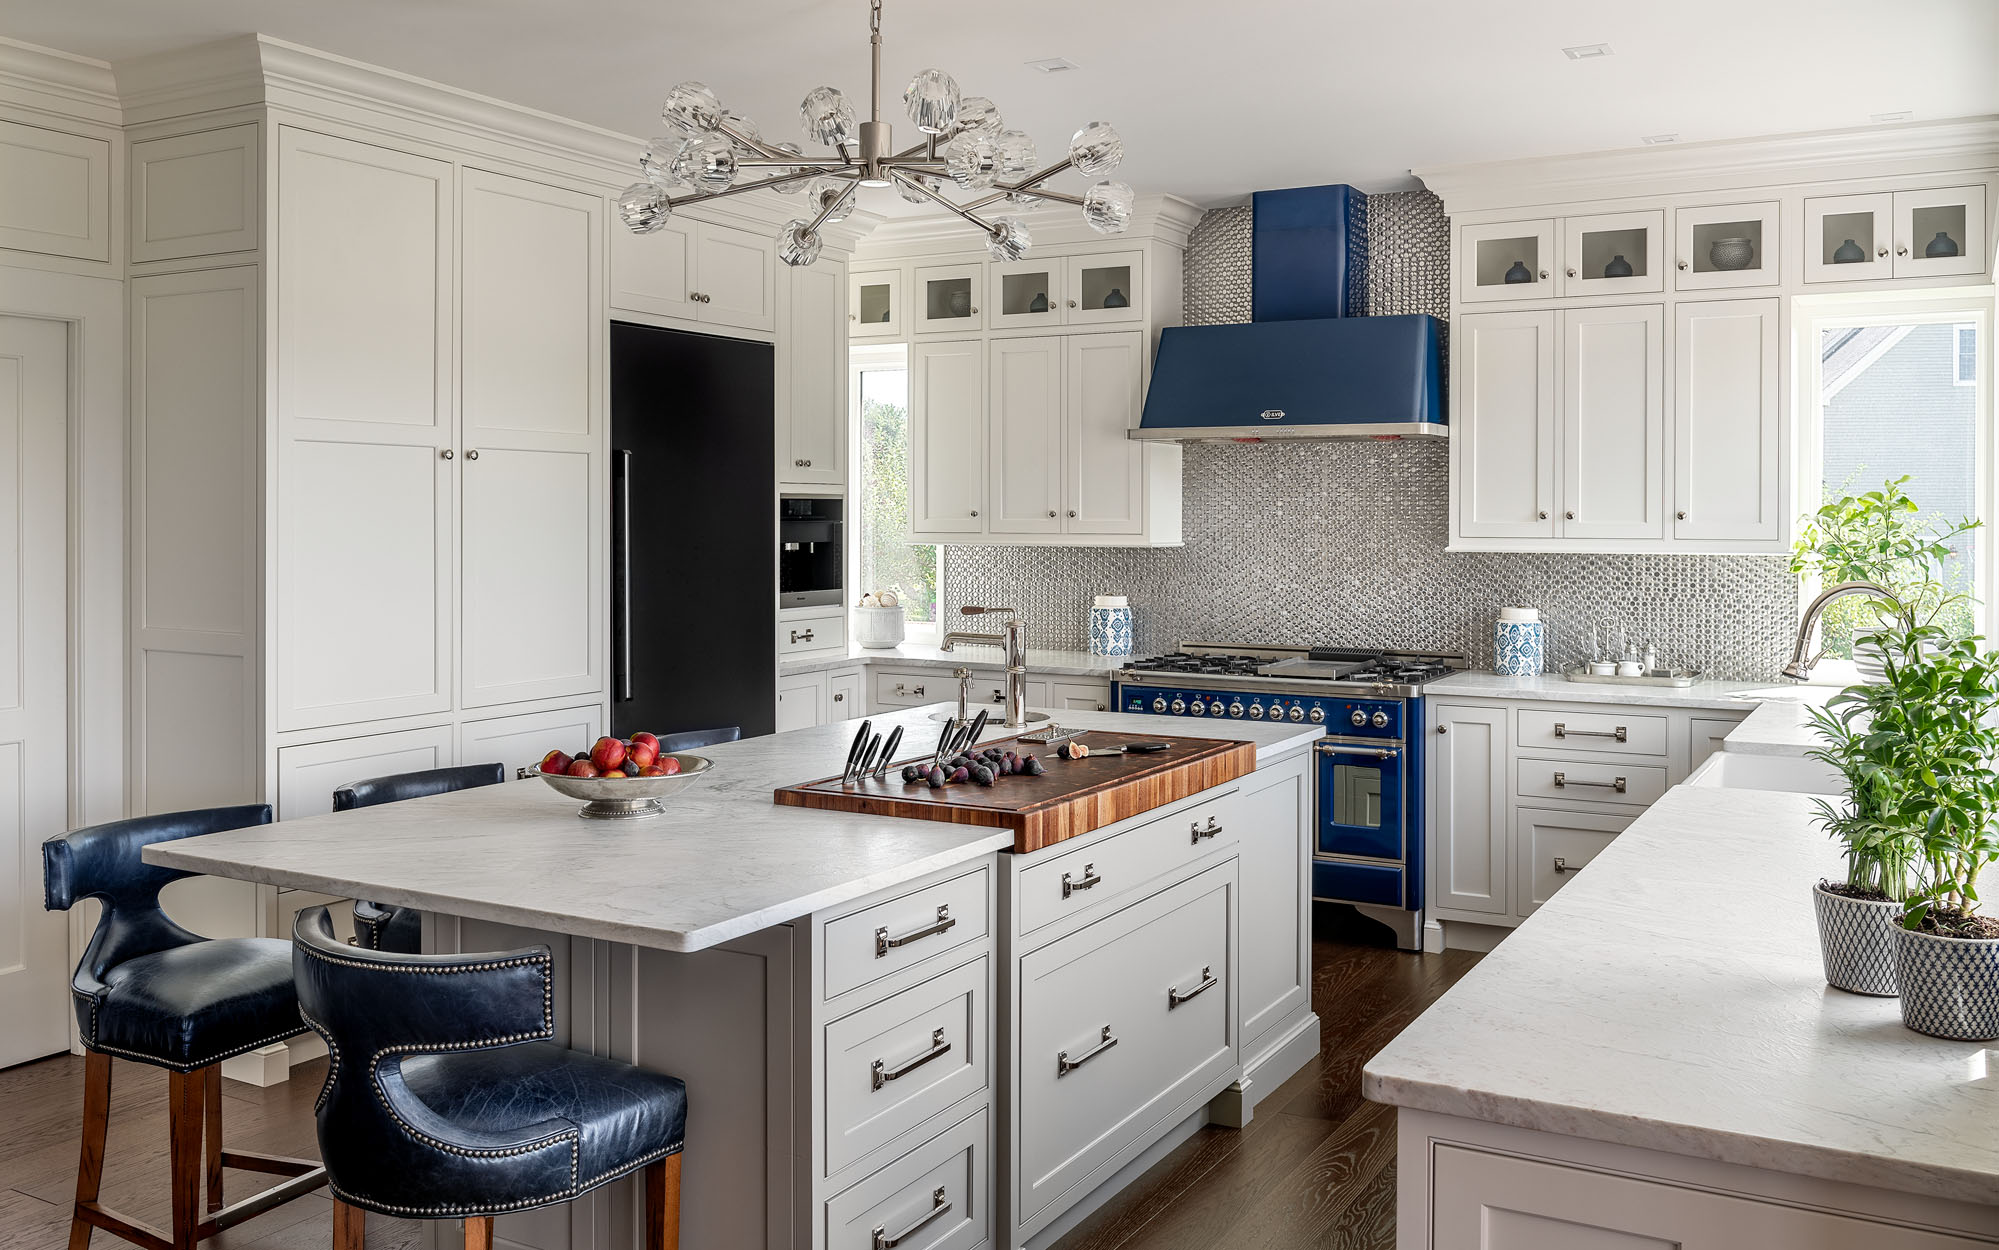 White Kitchen Cabinets Full Set With an Island